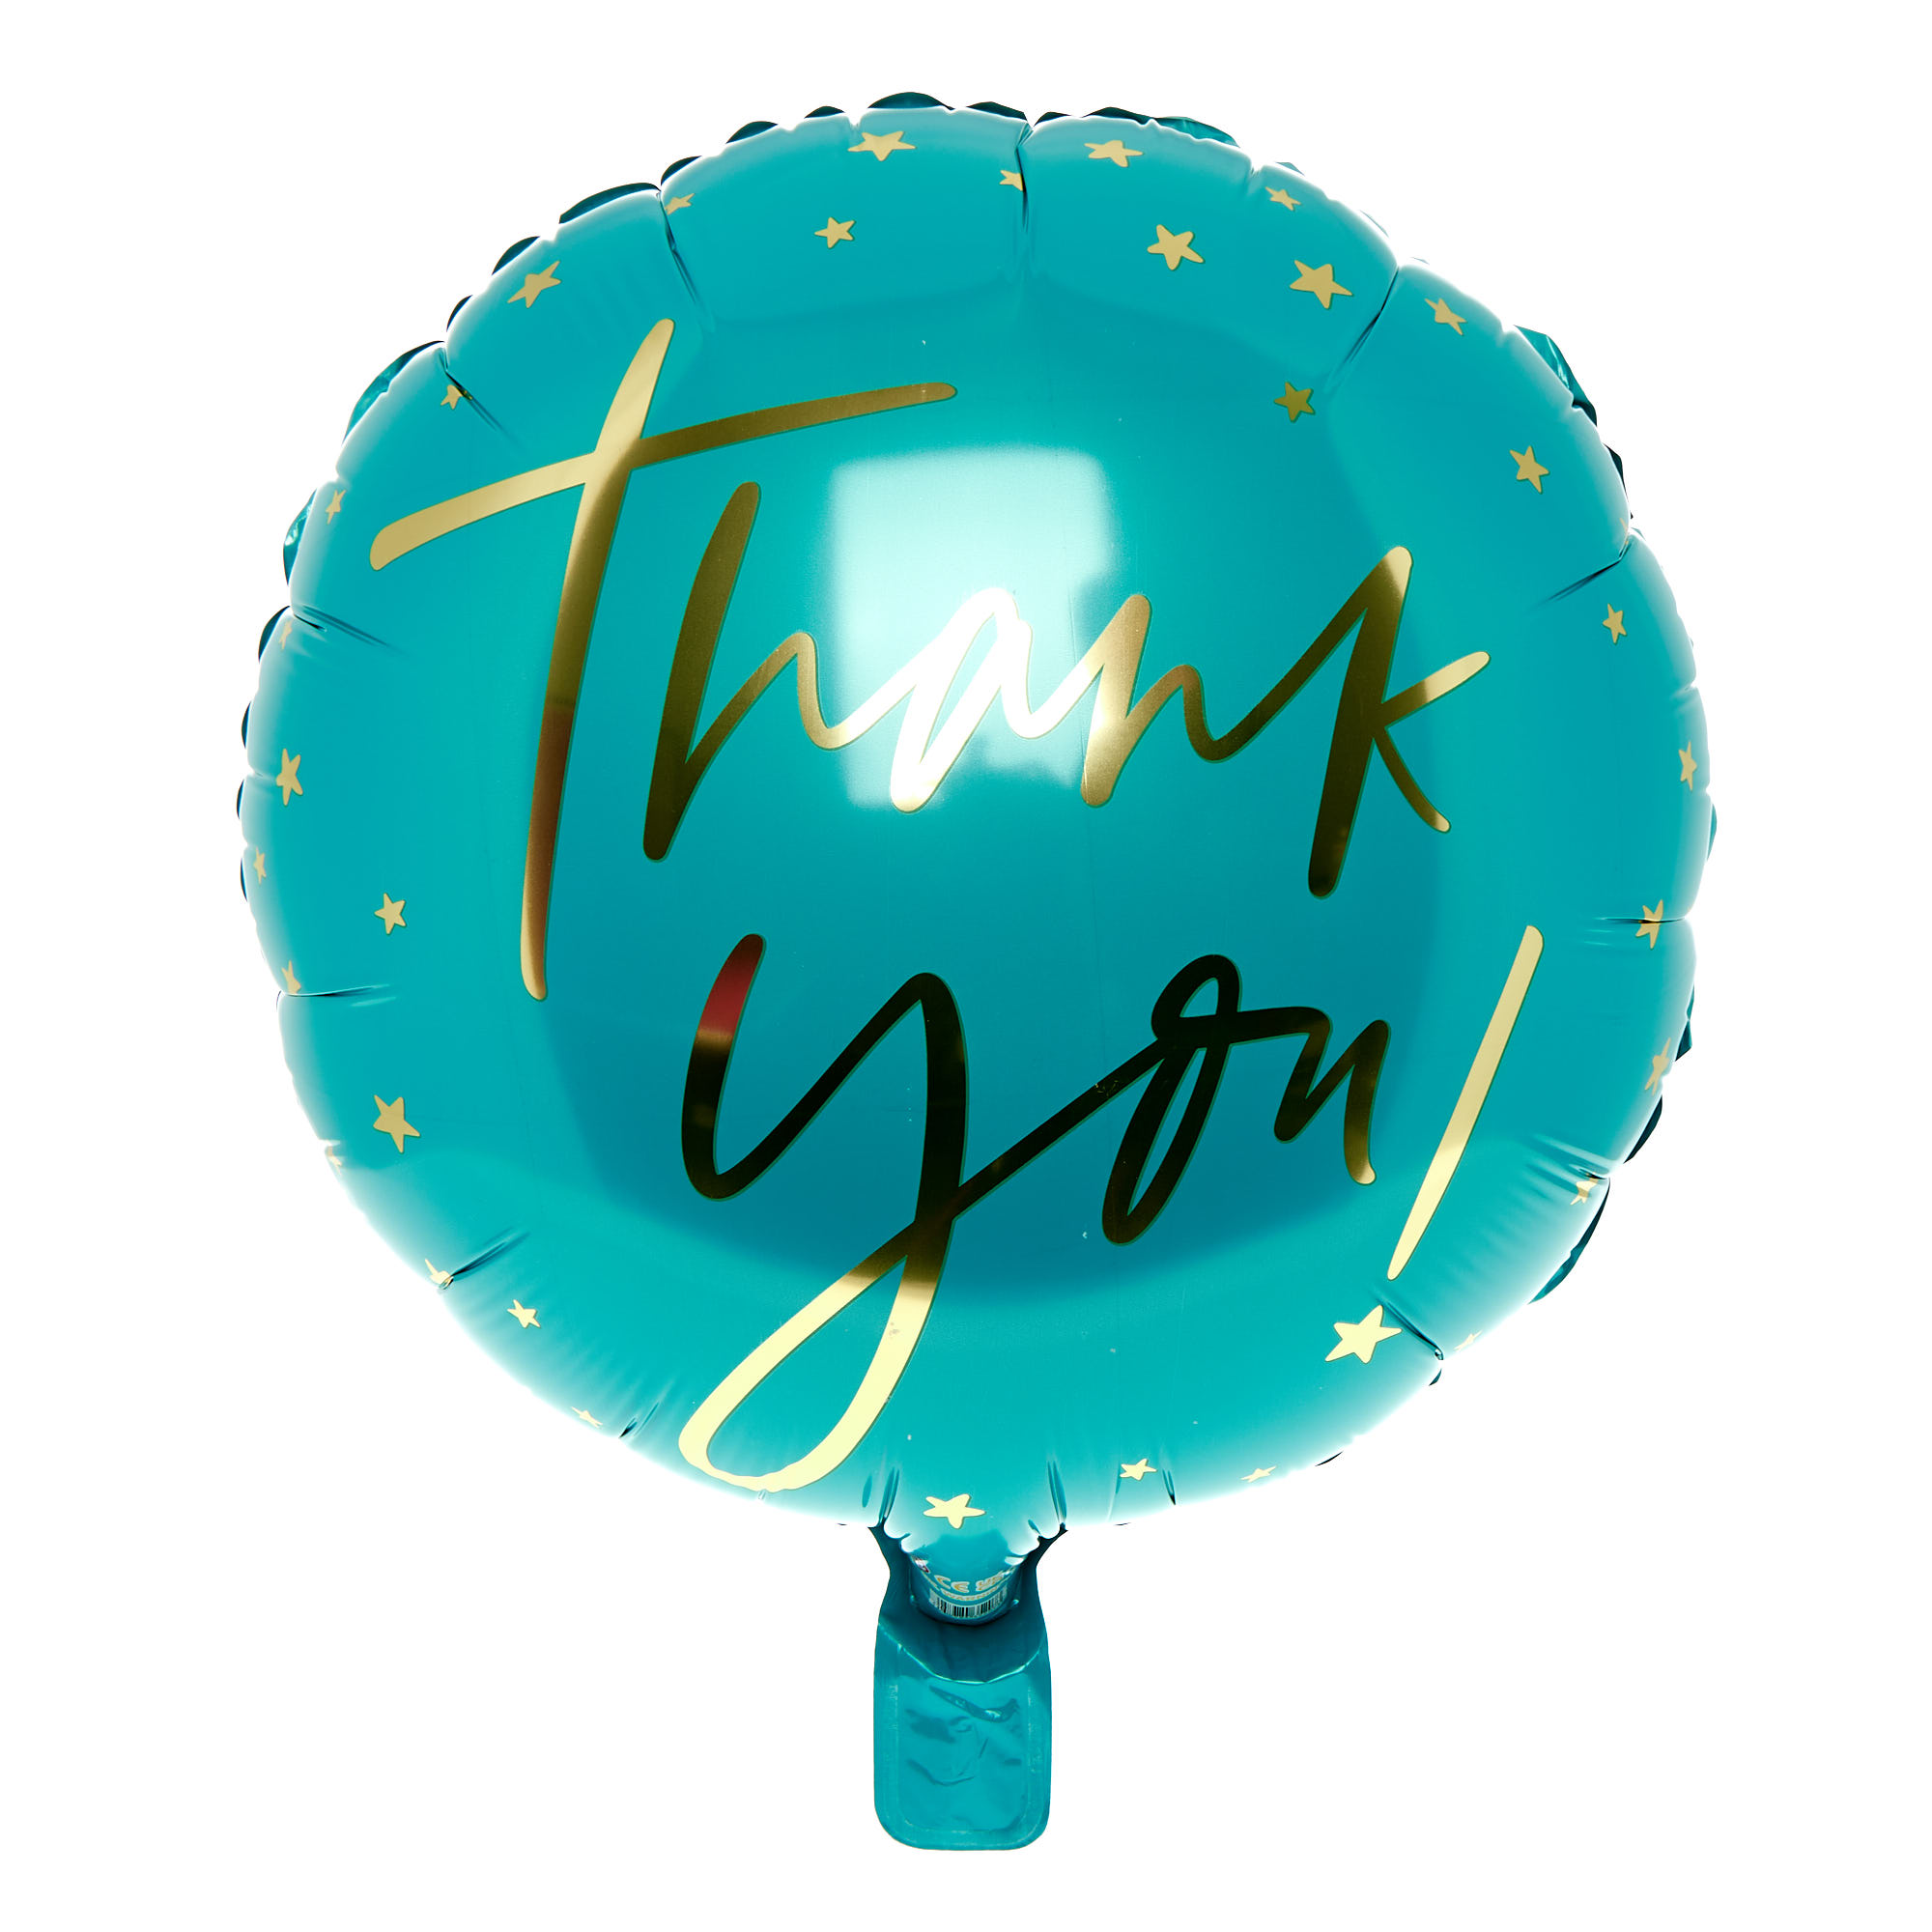 Blue & Gold Thank You Balloon & Lindt Chocolate Box - FREE GIFT CARD!